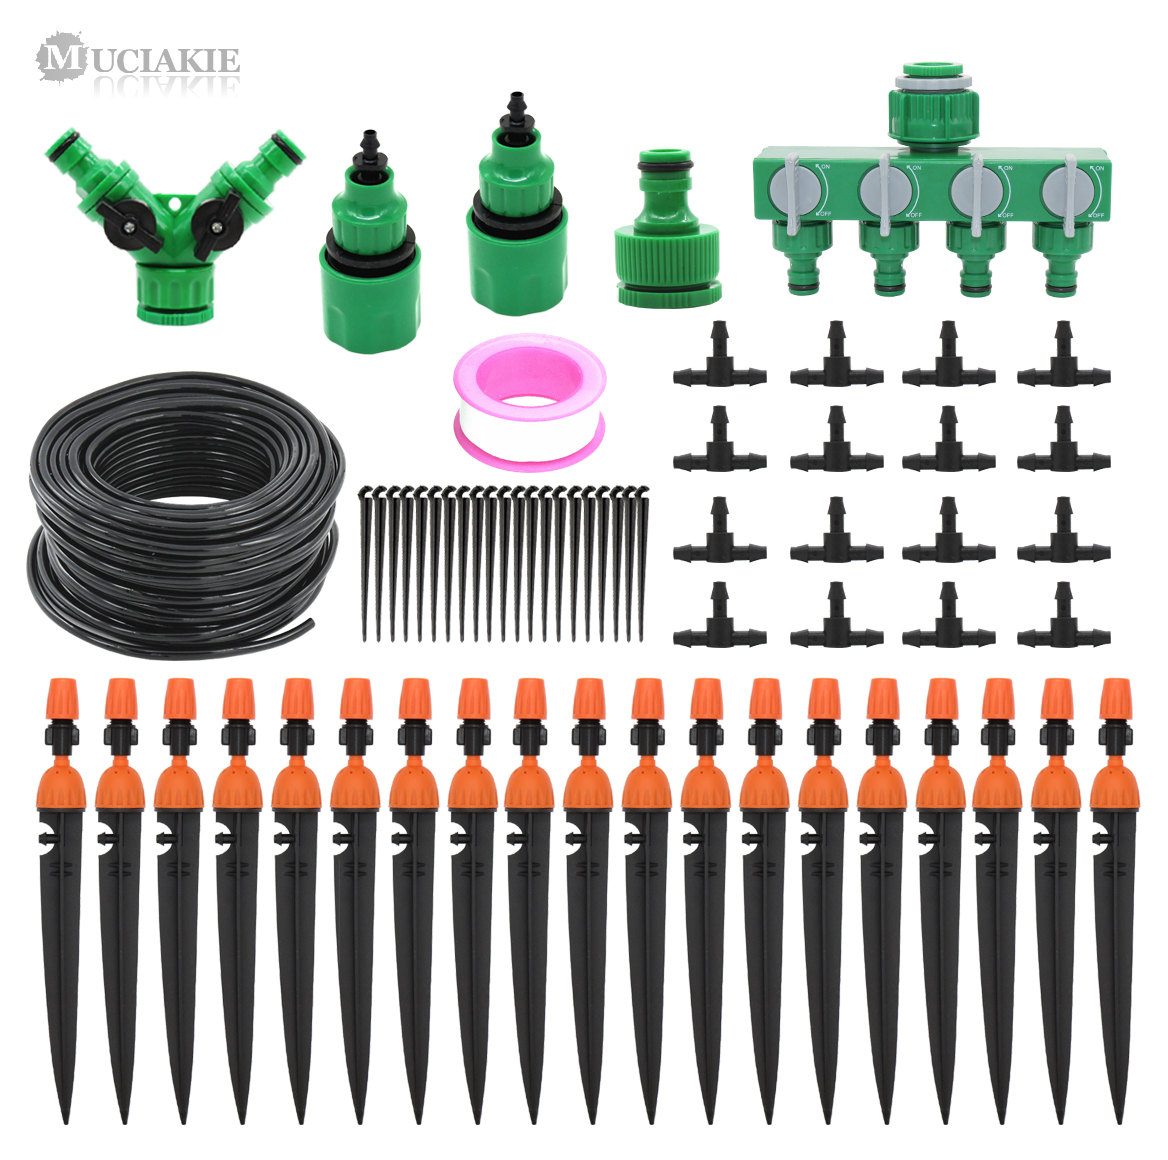 MUCIAKIE 5M To 40M DIY Micro Drip Irrigation System Self Plant Watering Kit For Yard Garden Lawn Drippers Sprinkling And Sprayer